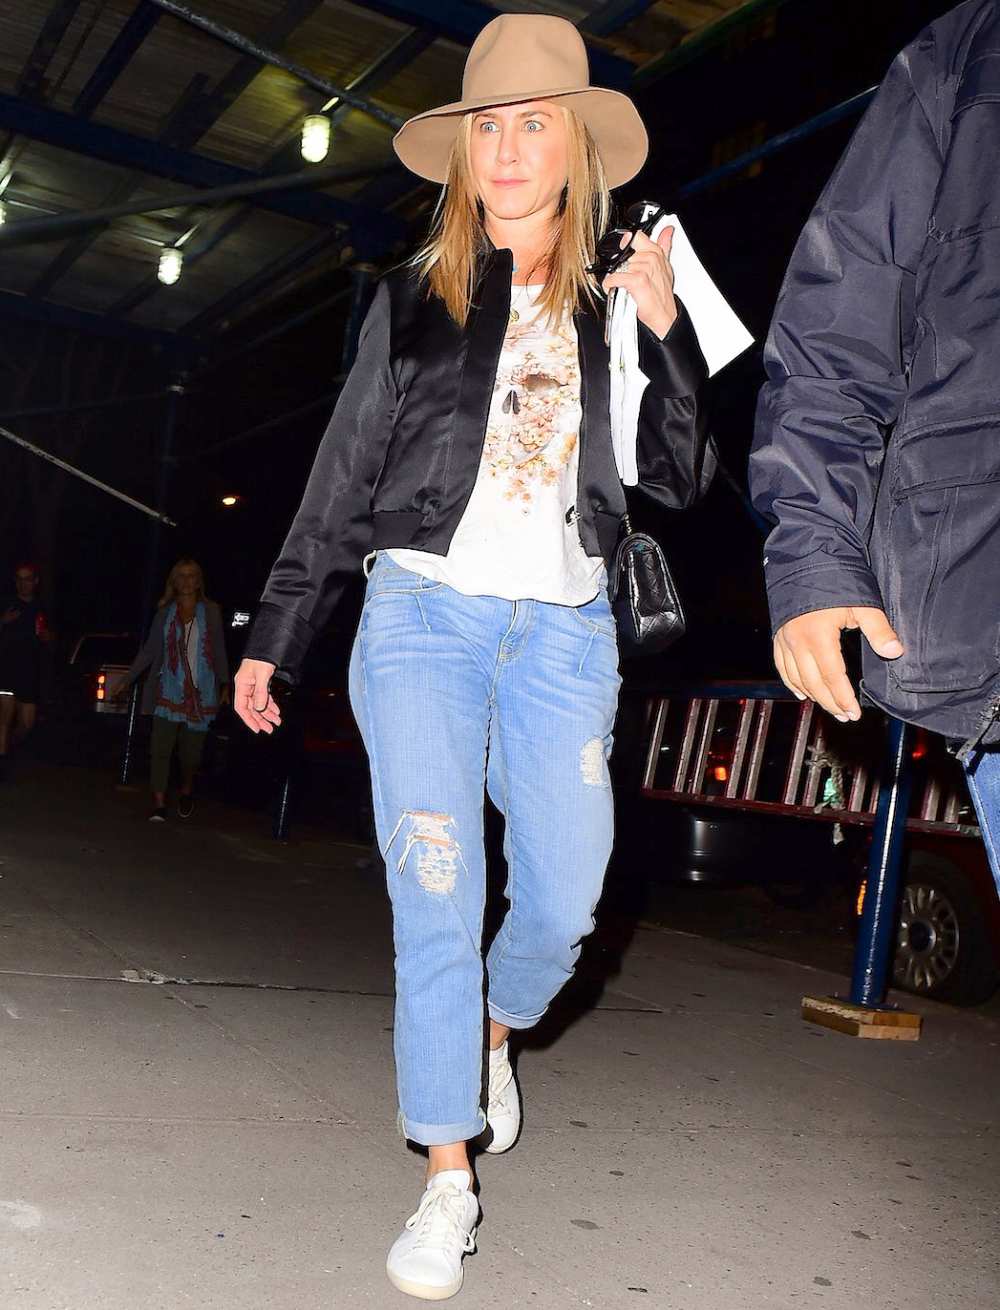 Jennifer Aniston was spotted arriving in NYC on Thursday night.